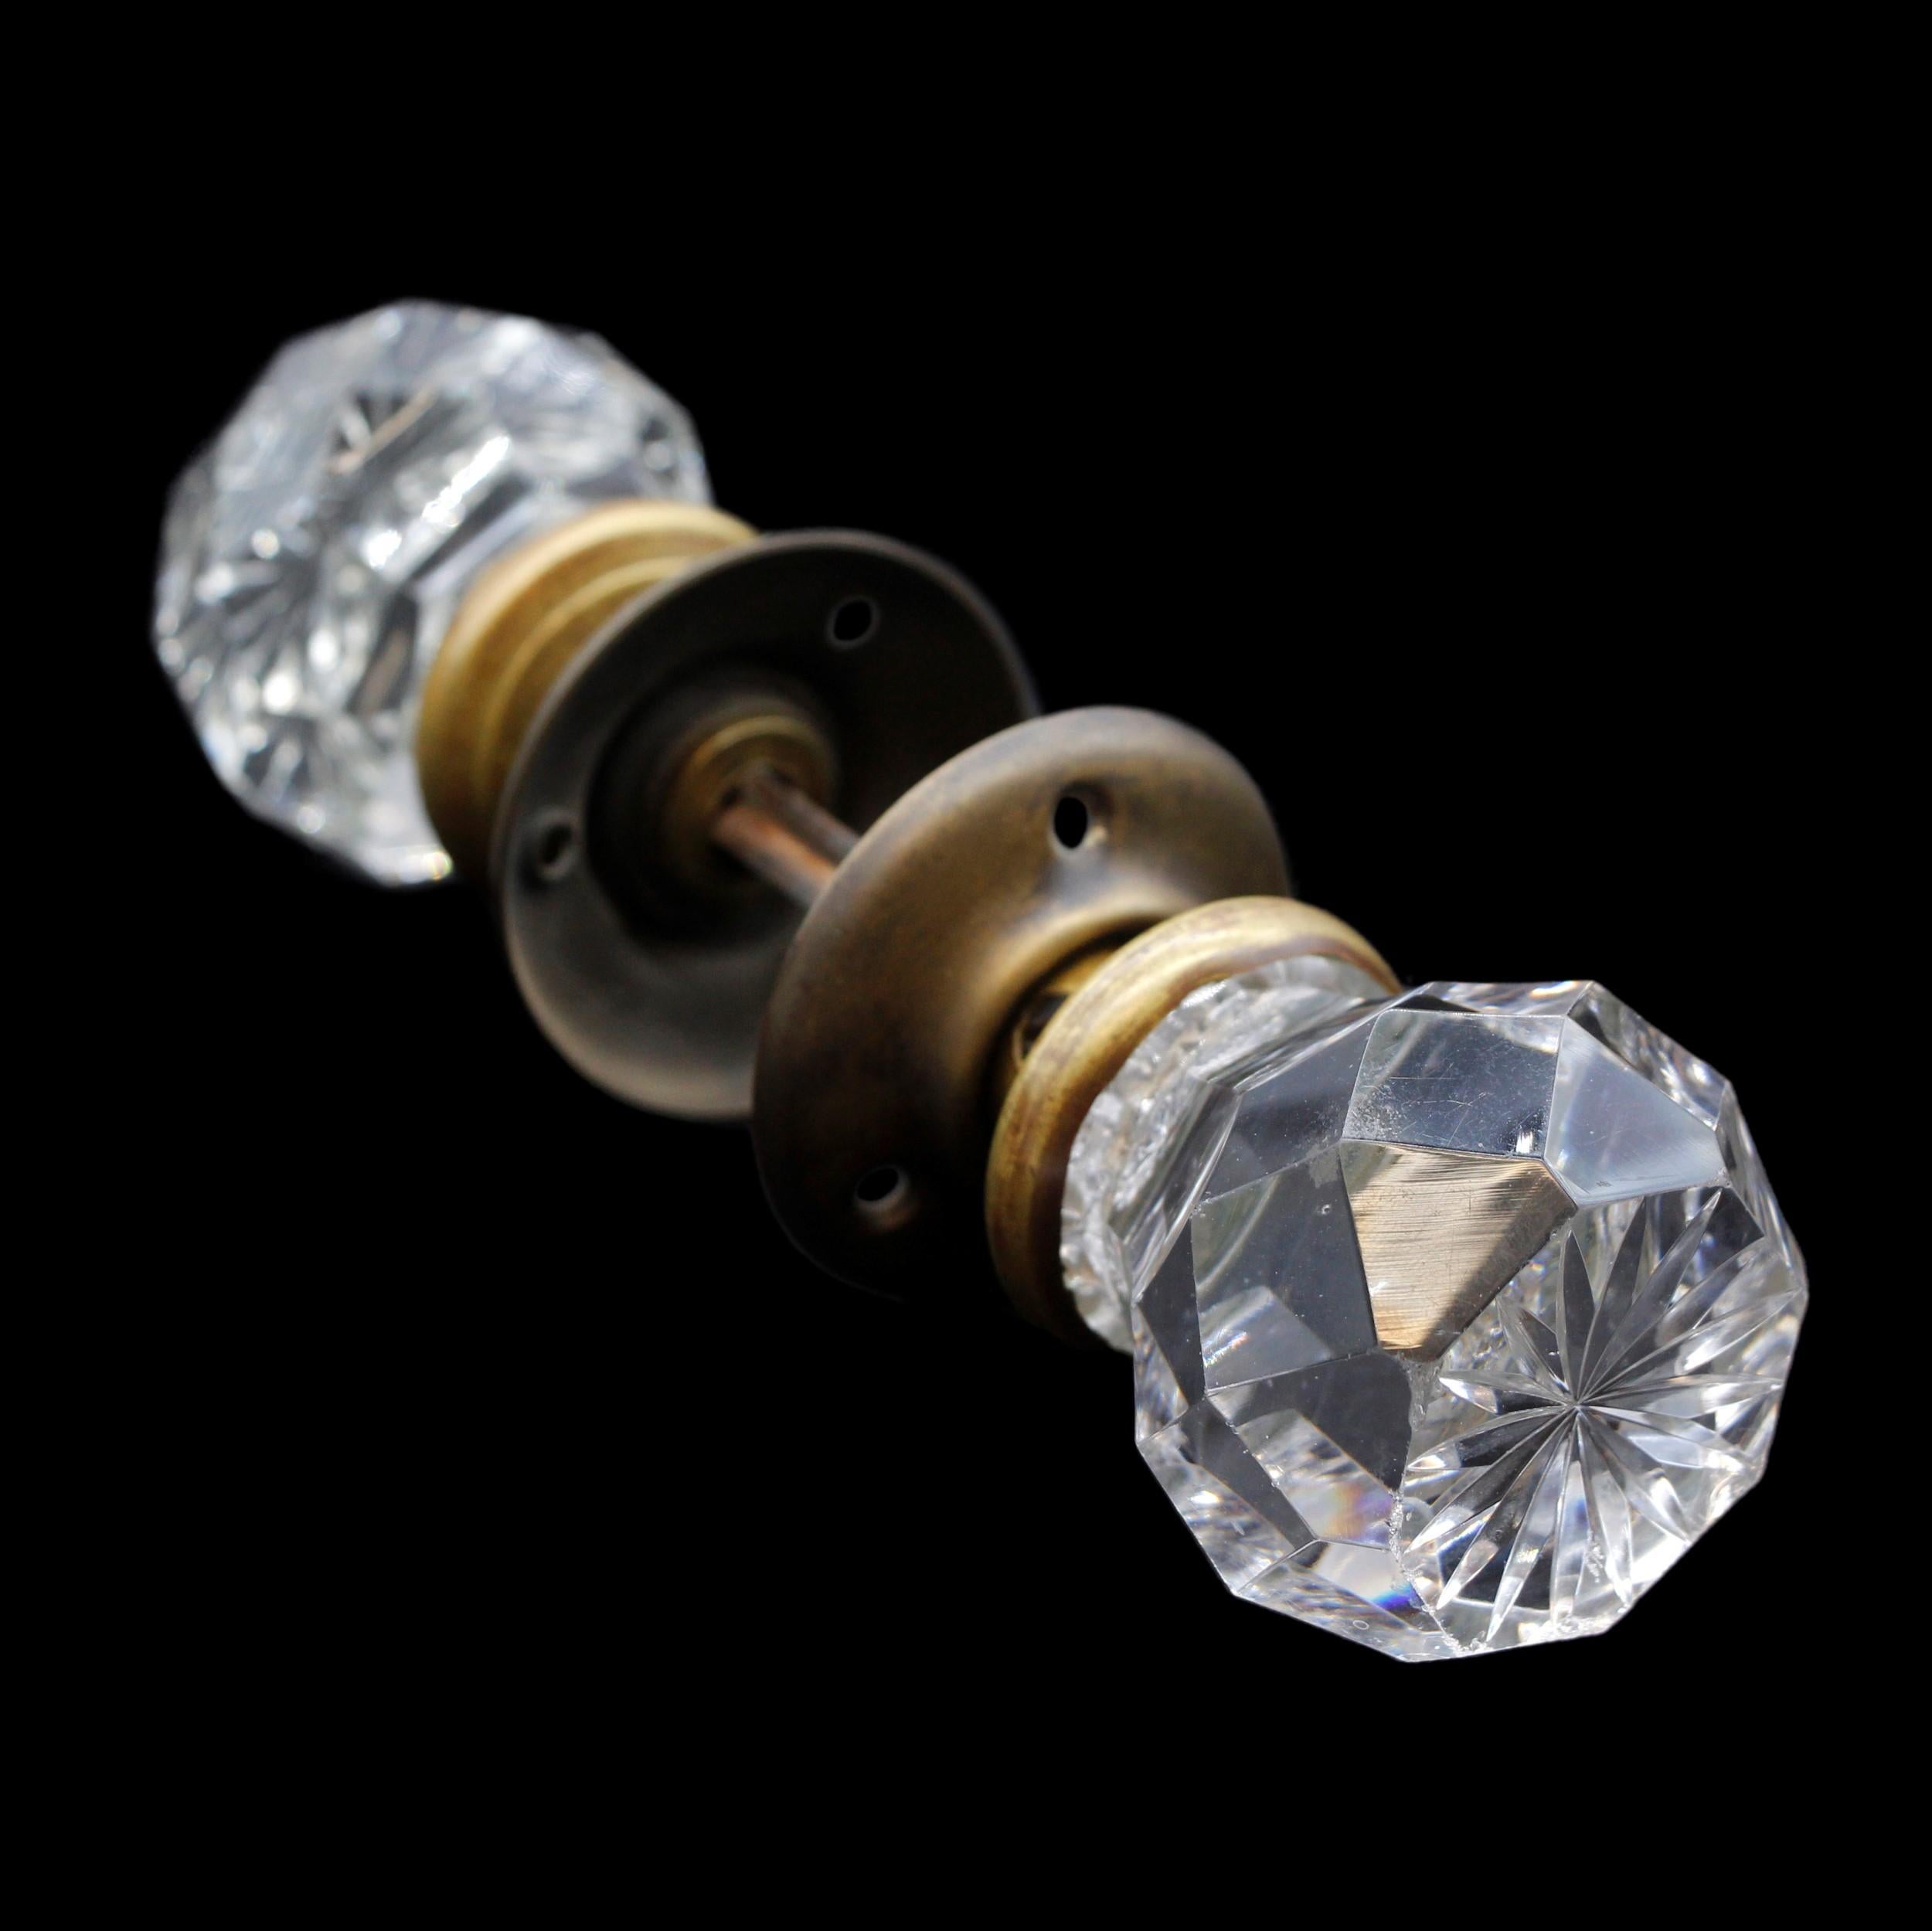 Exquisite early 20th Century faceted cut glass doorknob set. Features an etched star design in the center surface. Comes complete with two brass rosettes and spindle. Priced as one set. This can be seen at our 400 Gilligan St location in Scranton,